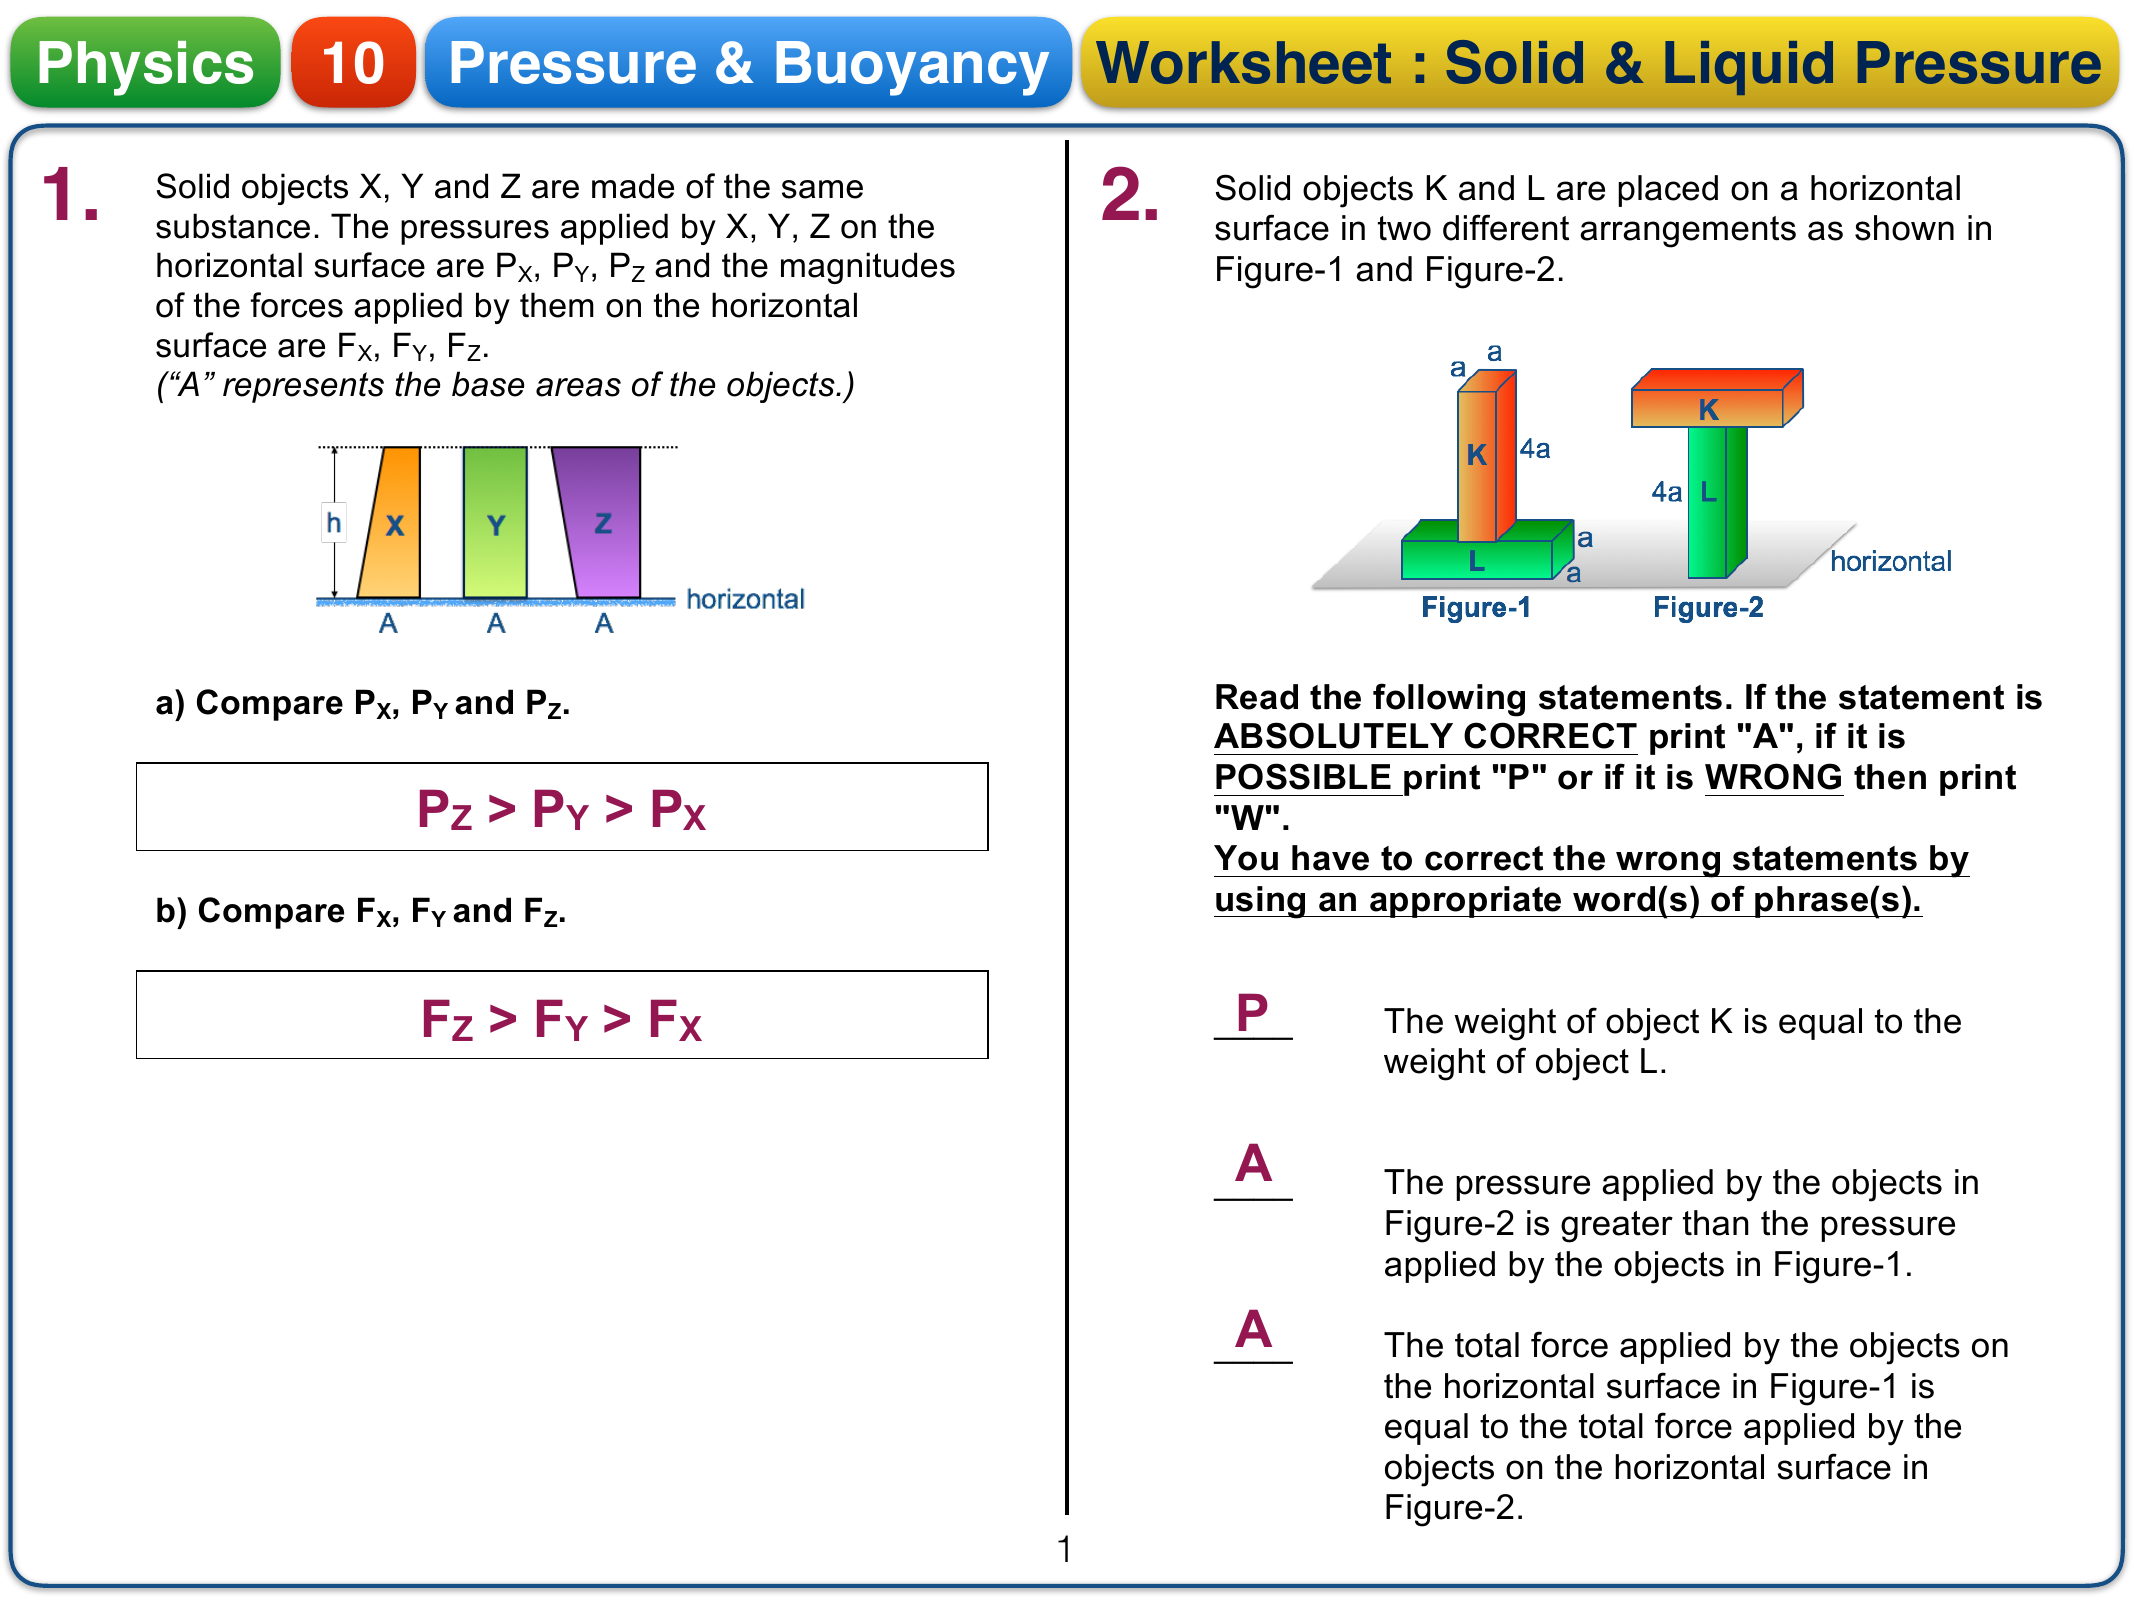 problem solving for pressure in physics